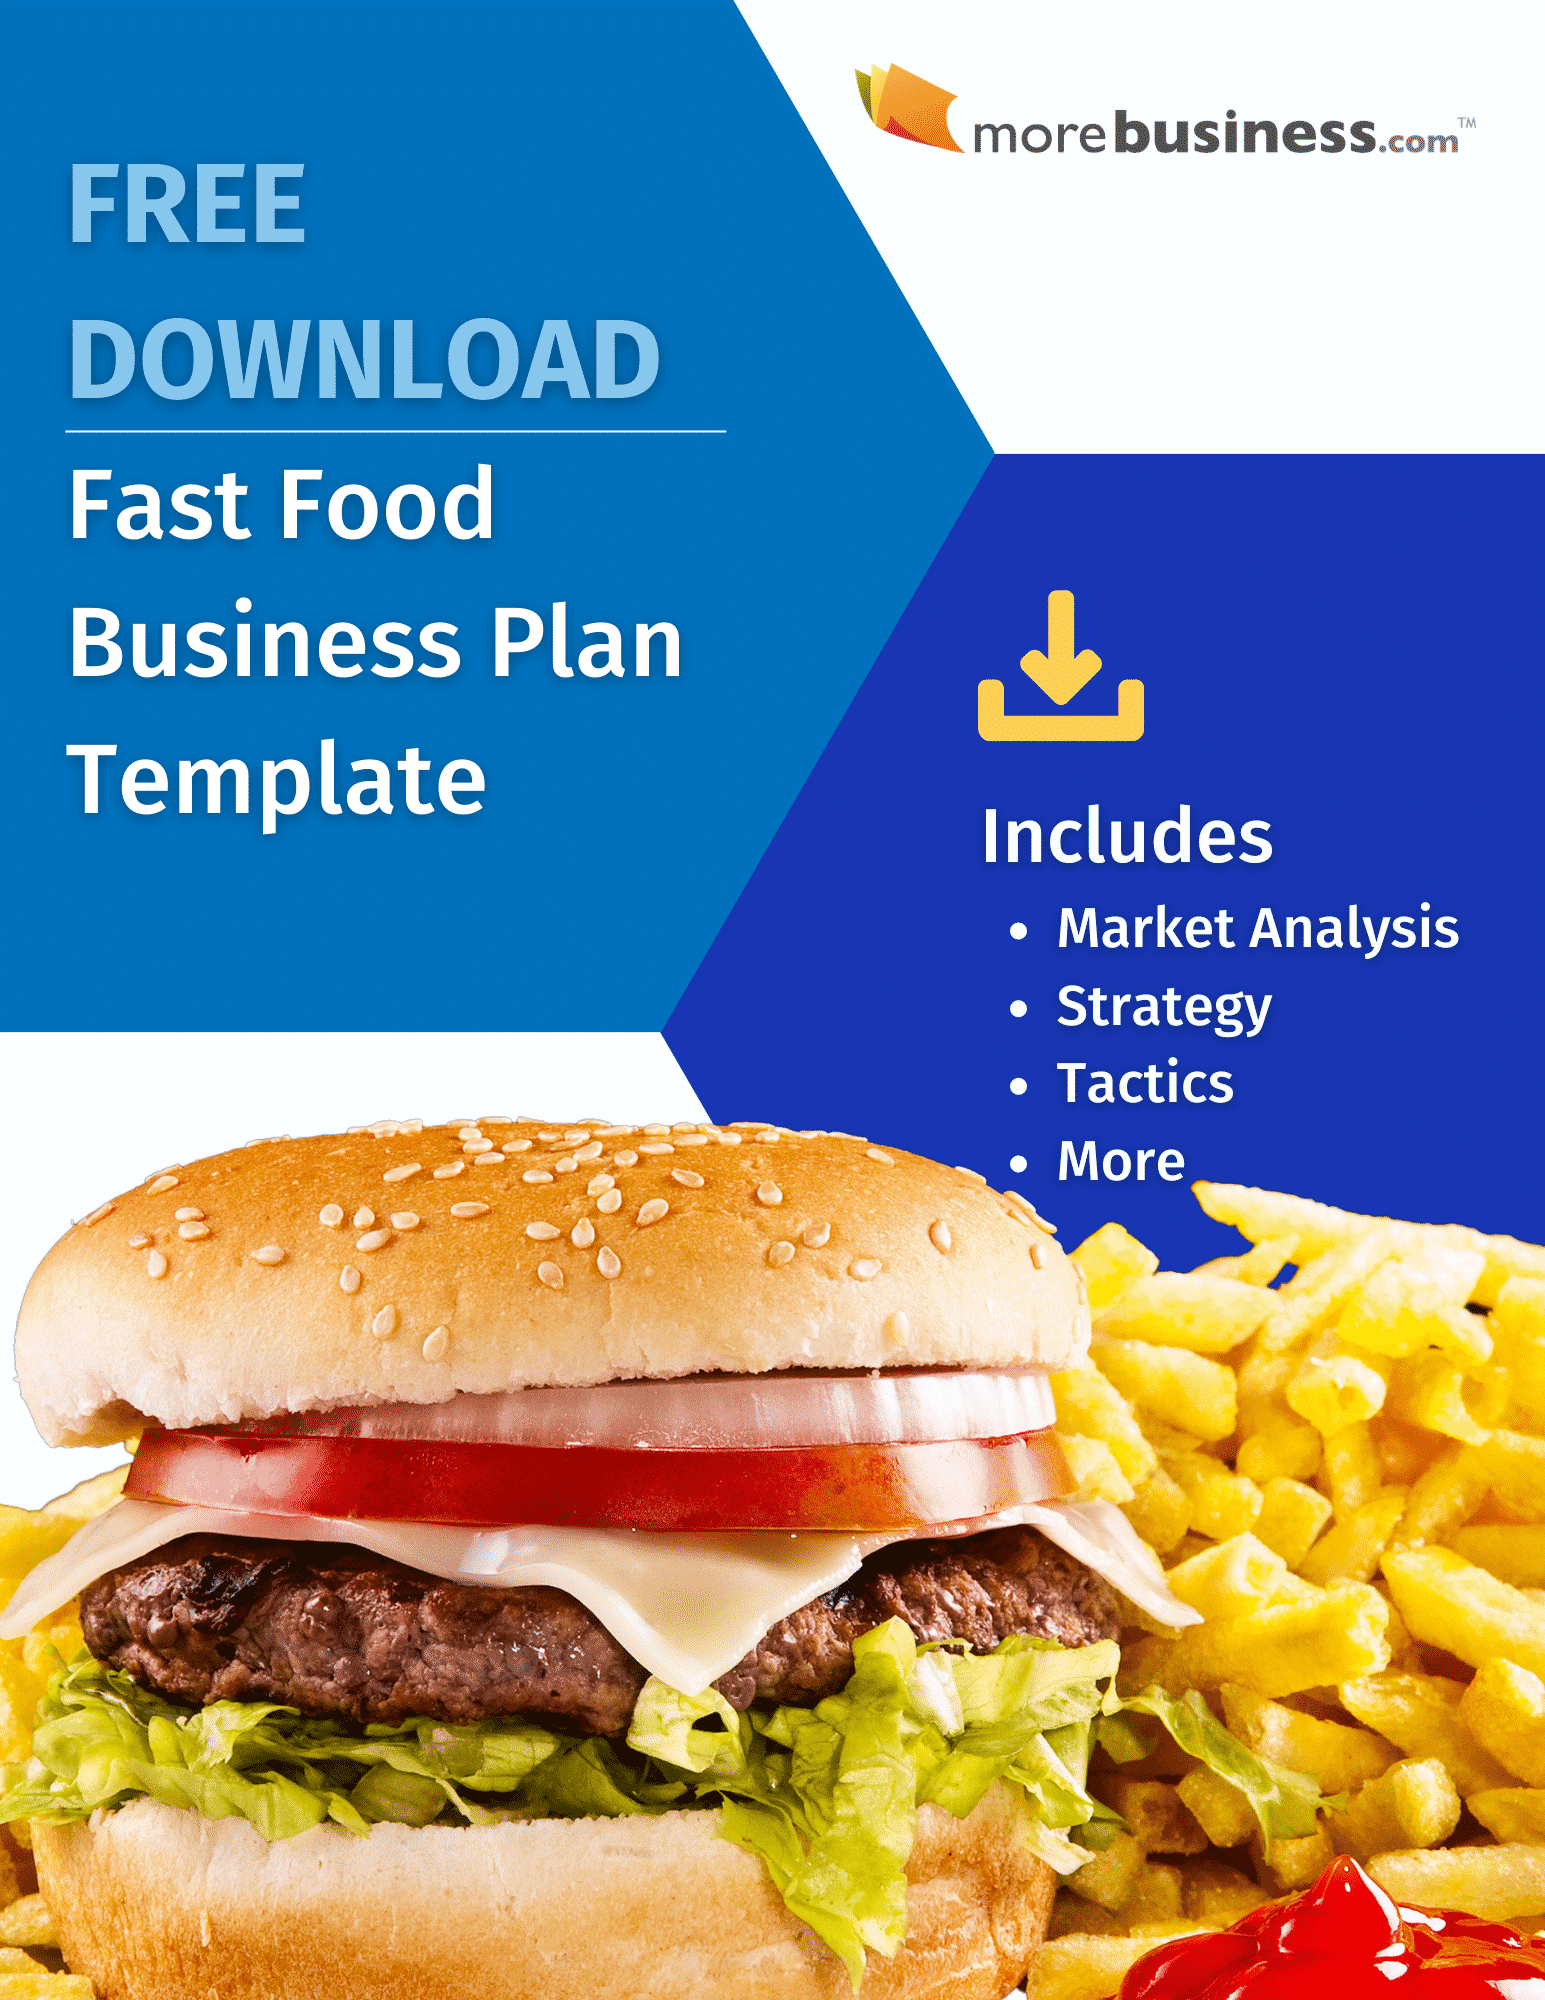 Fast Food Restaurant Business Plan - Free Download  MoreBusiness.com With Regard To Restaurant Business Proposal Template